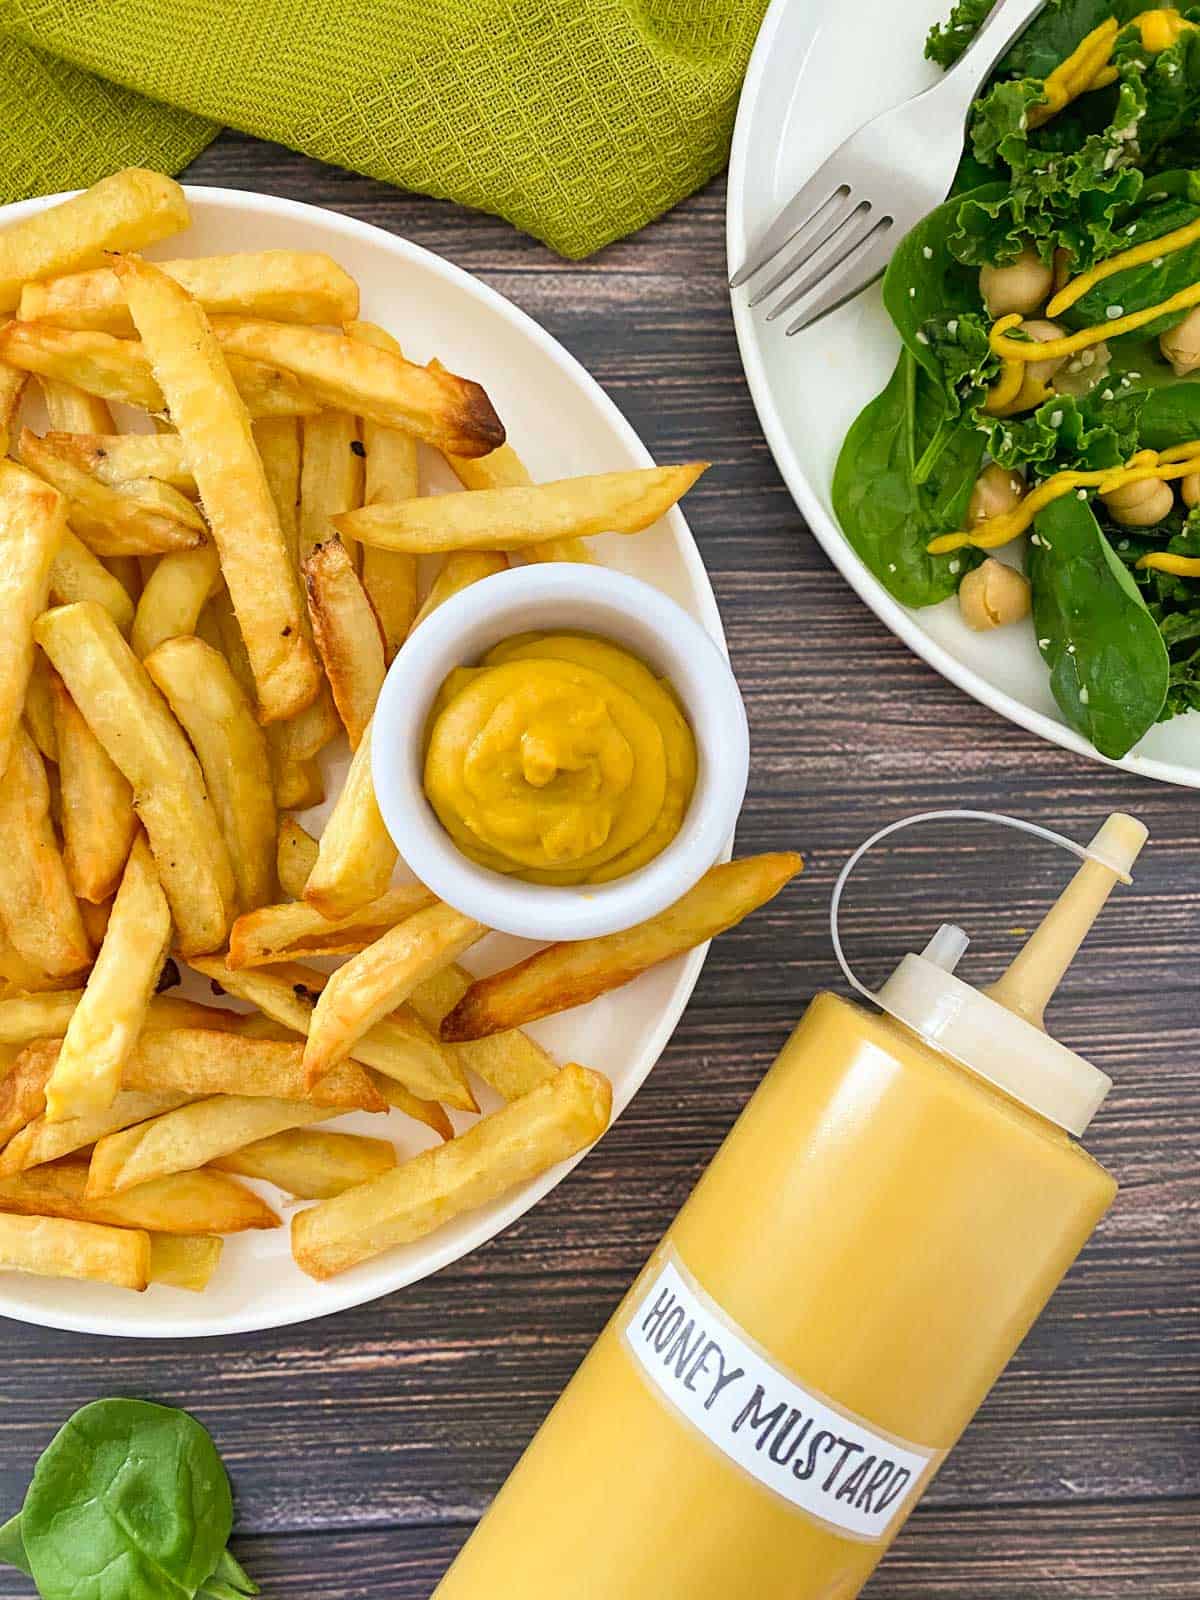 Plate of french fries with small dipping bowl filled with honey mustard.